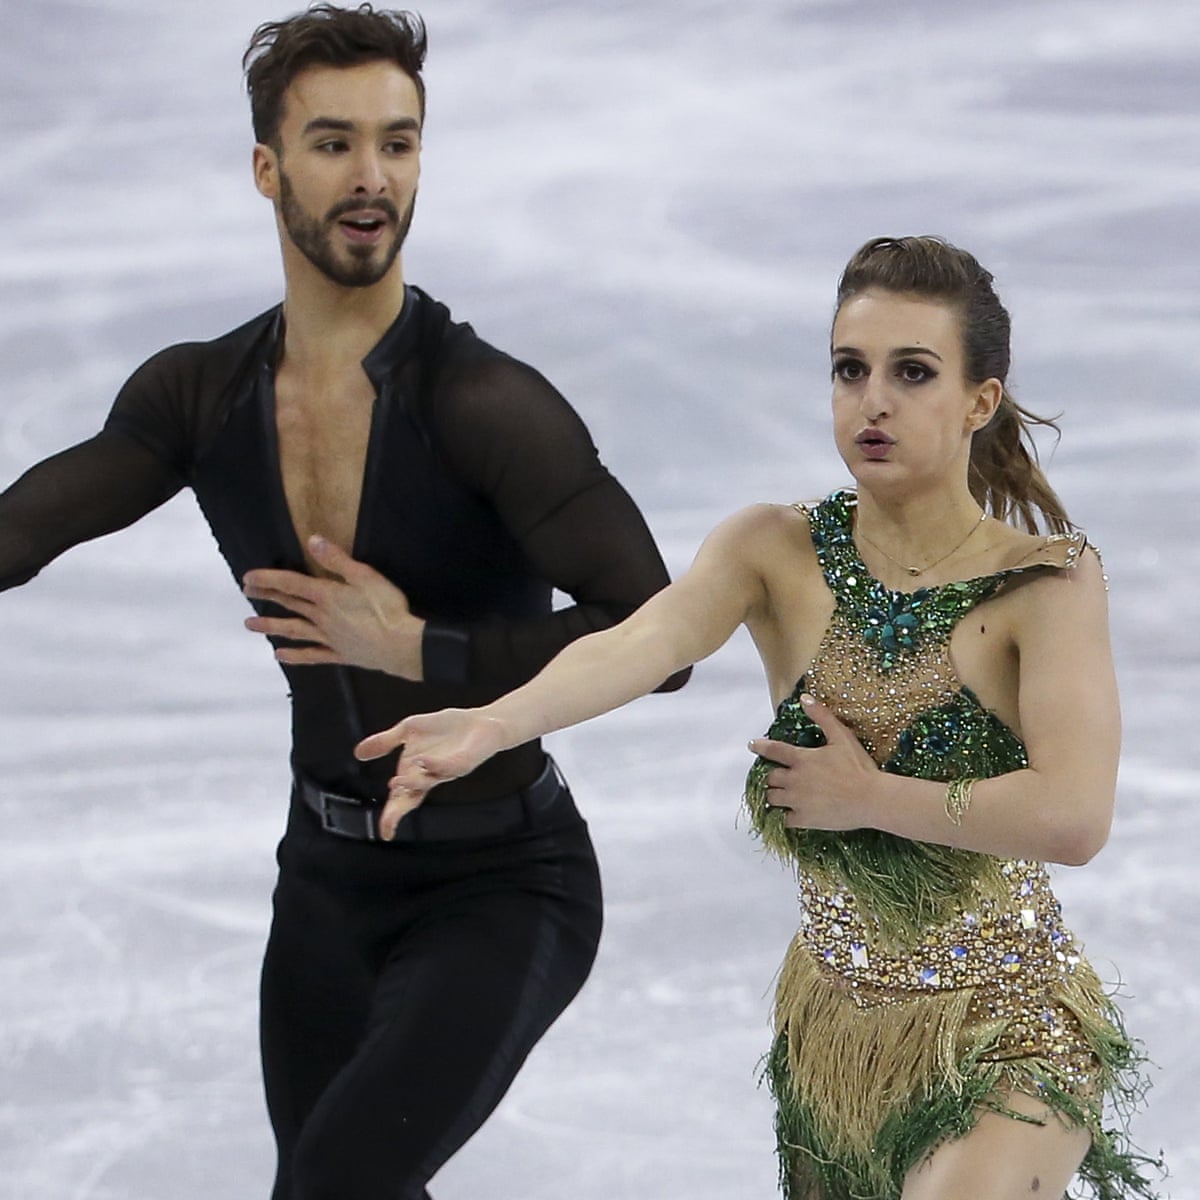 ...Mid-Routine Olympic Wardrobe Malfunction Video French figure skater Gabr...